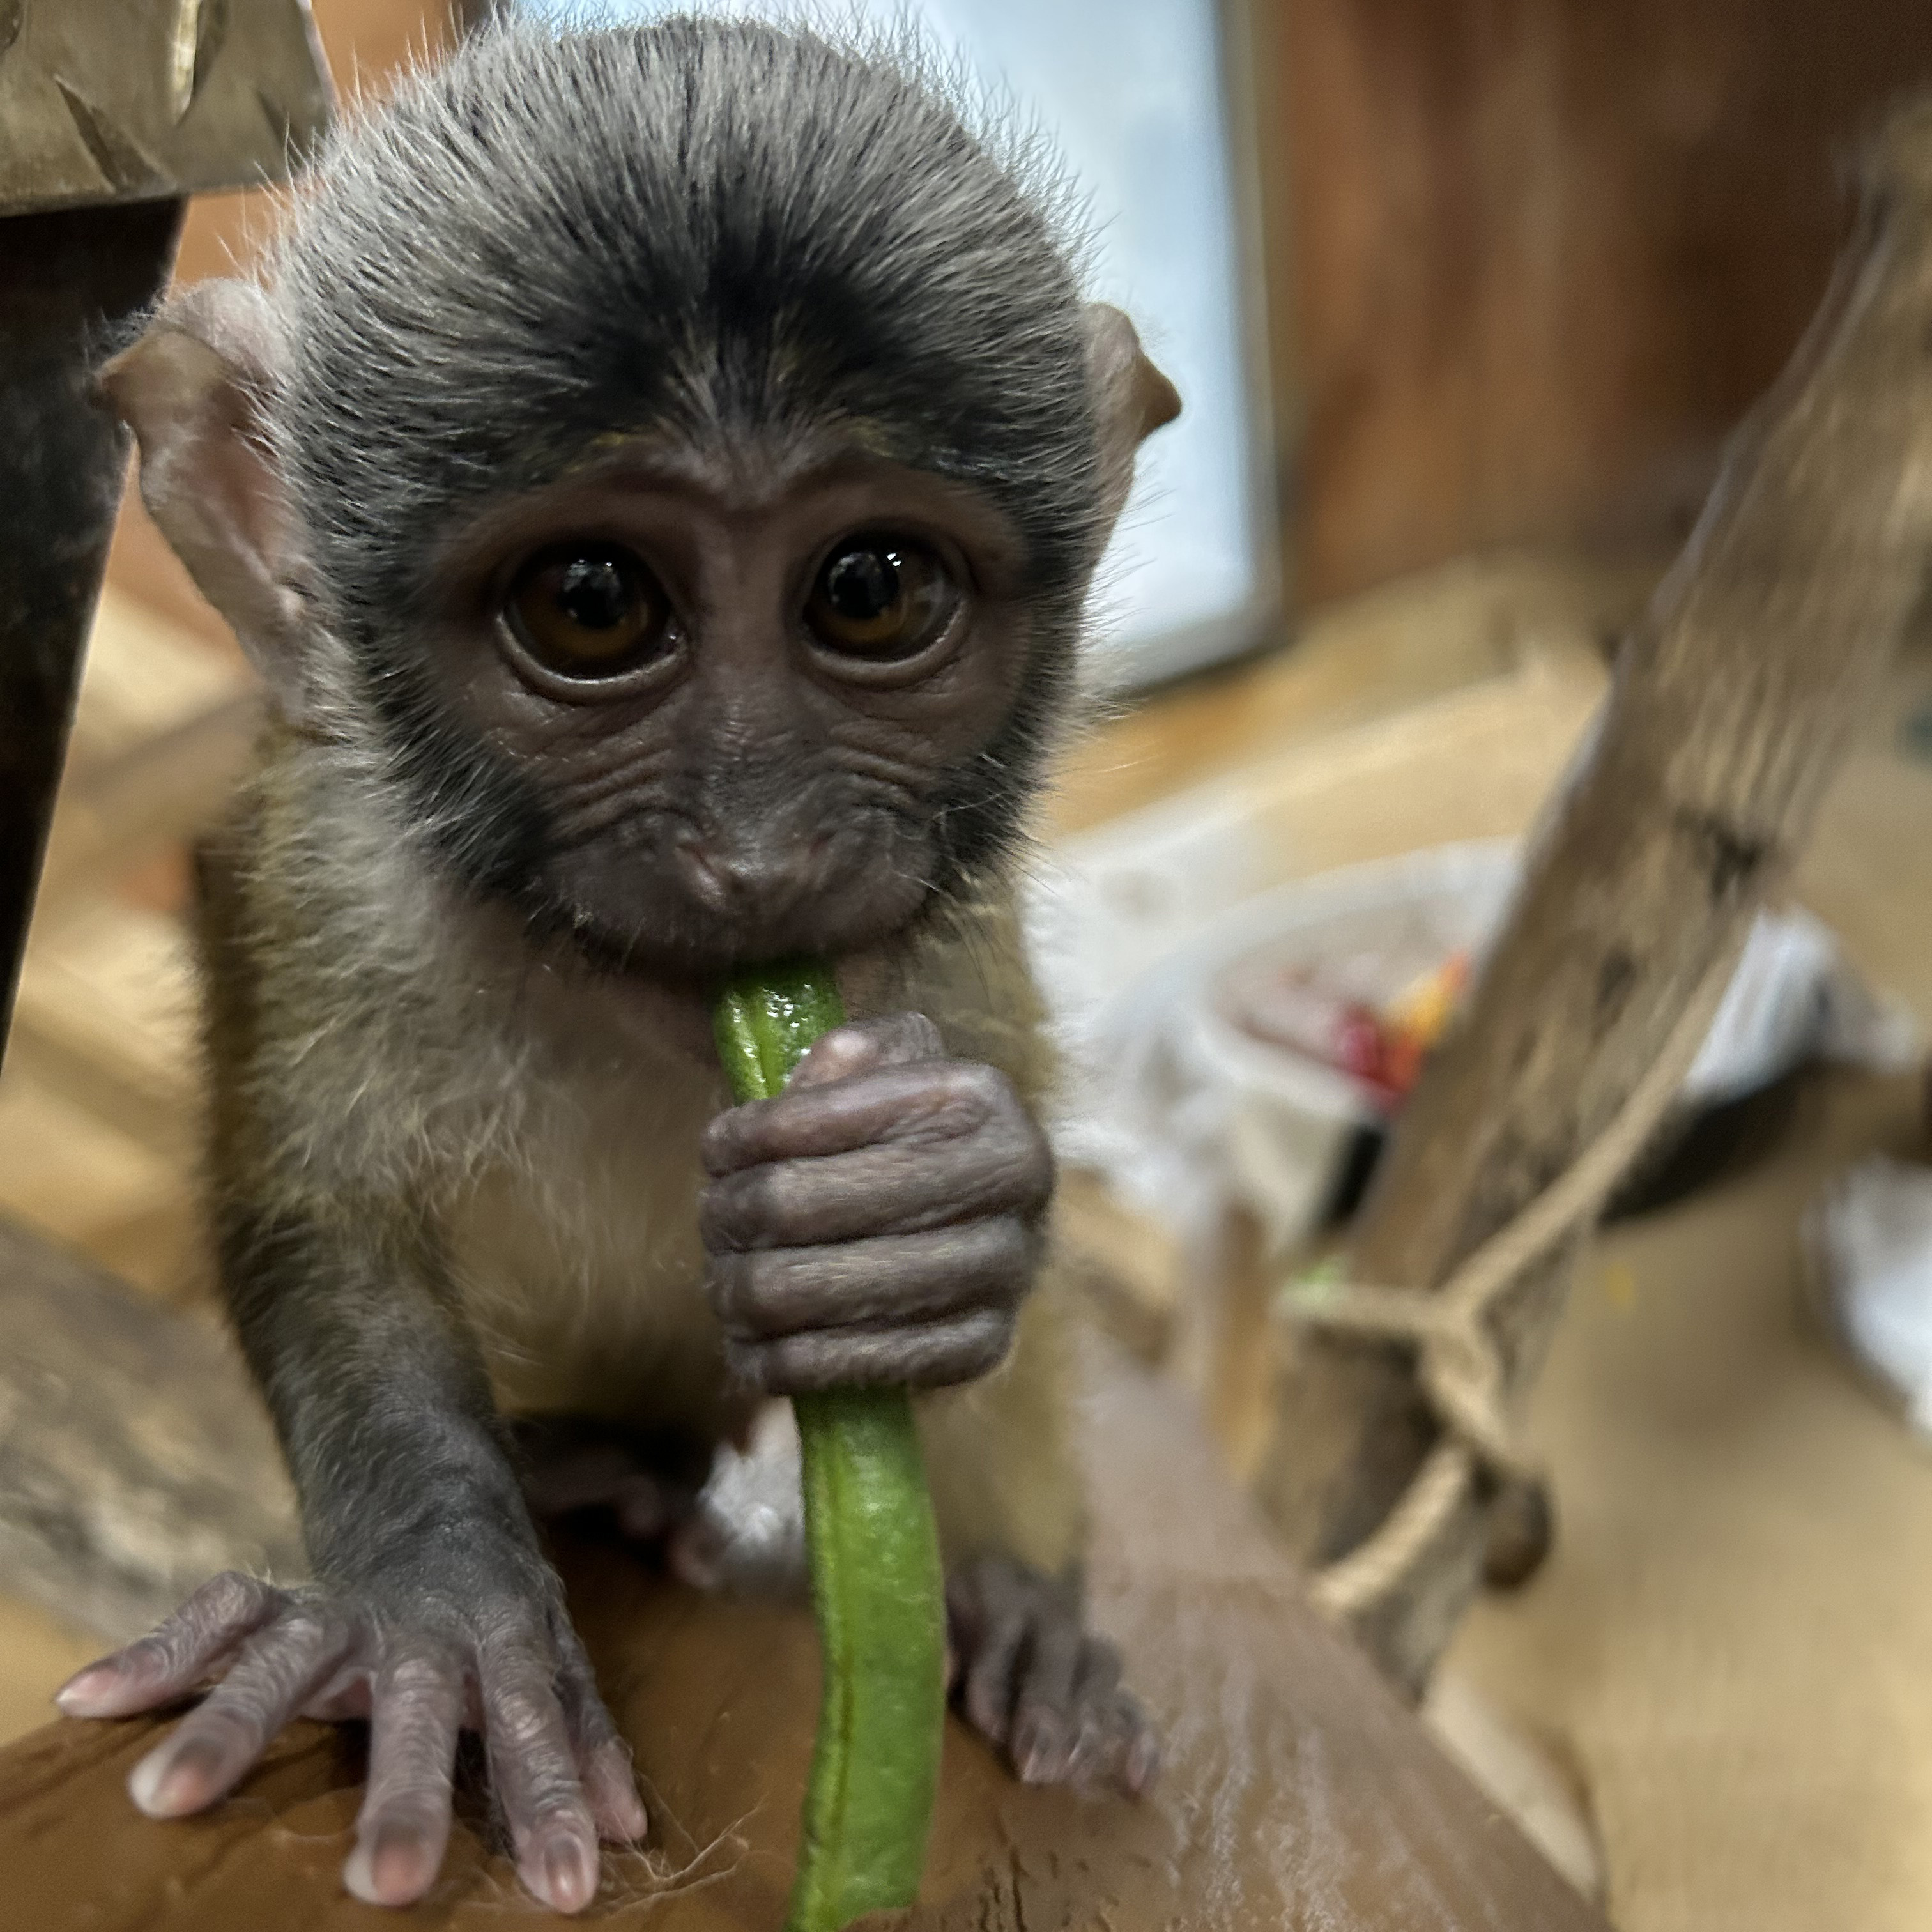 A juvenile swamp monkey looks into the camera while munching on a green bean.